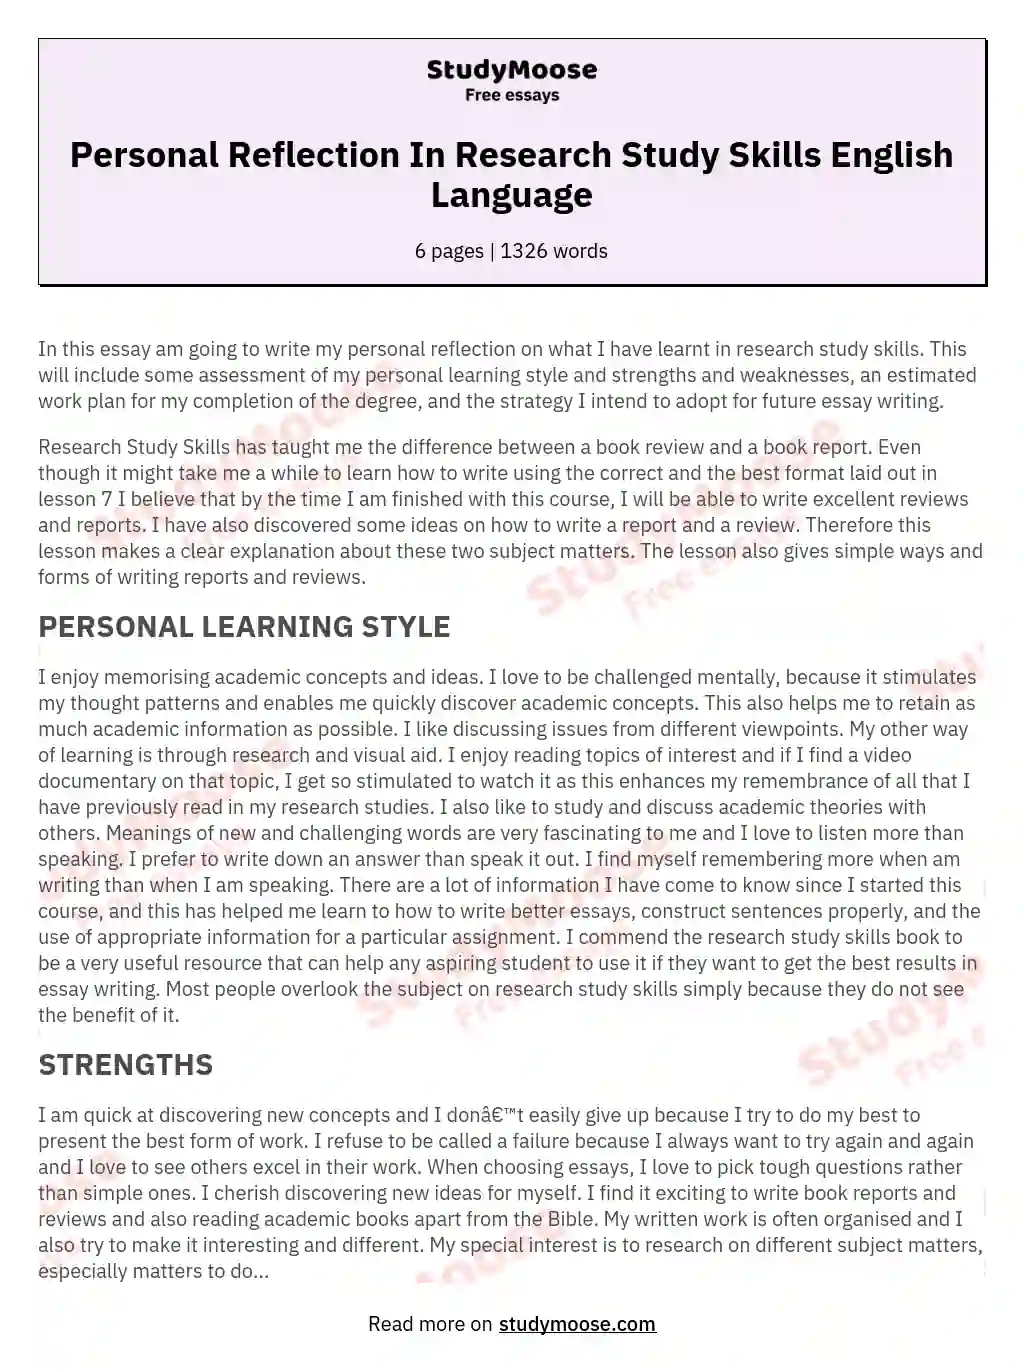 Personal Reflection In Research Study Skills English Language